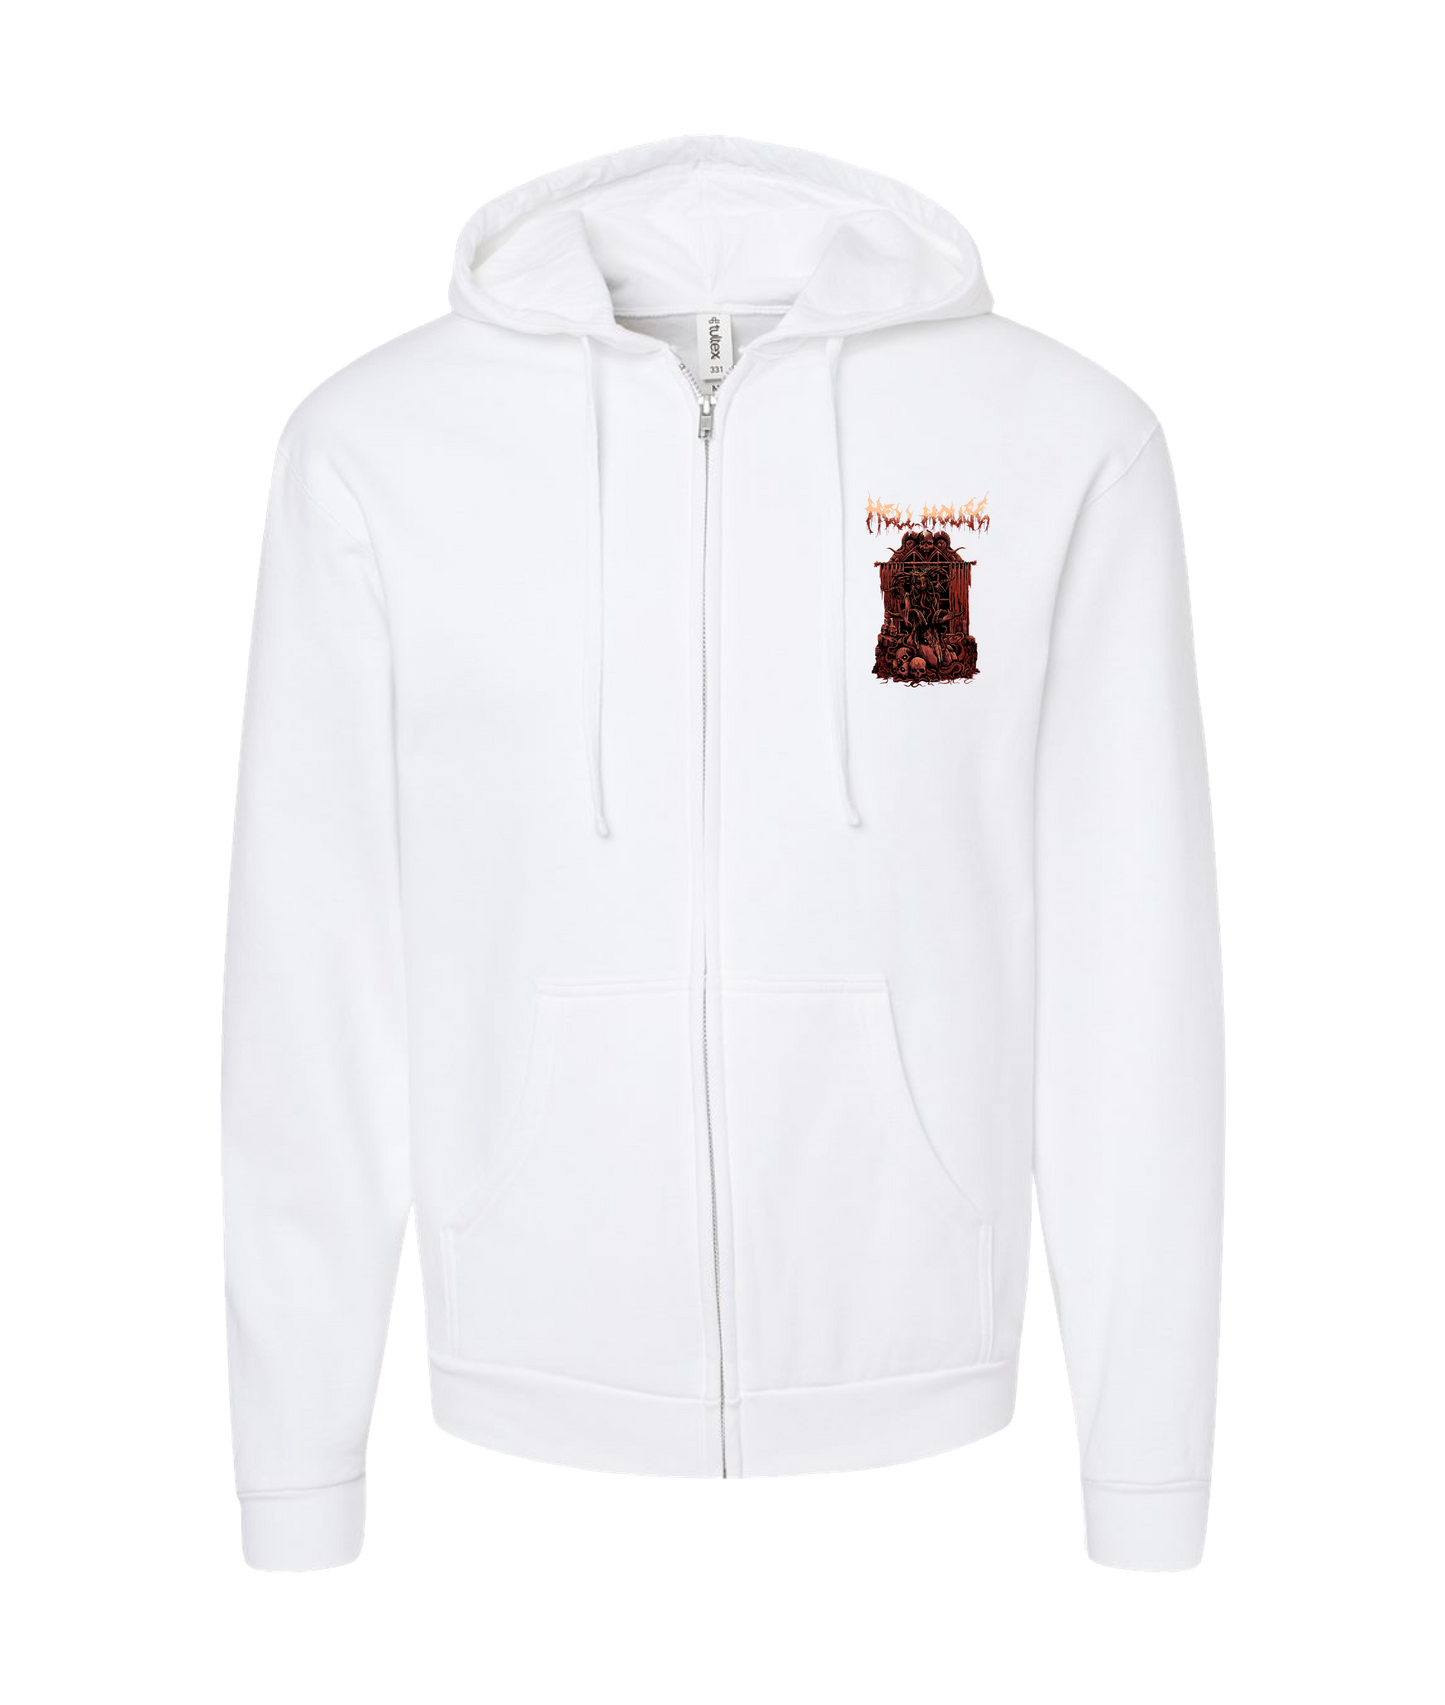 Hellhouse crypt - GIRLGOAT - White Zip Up Hoodie